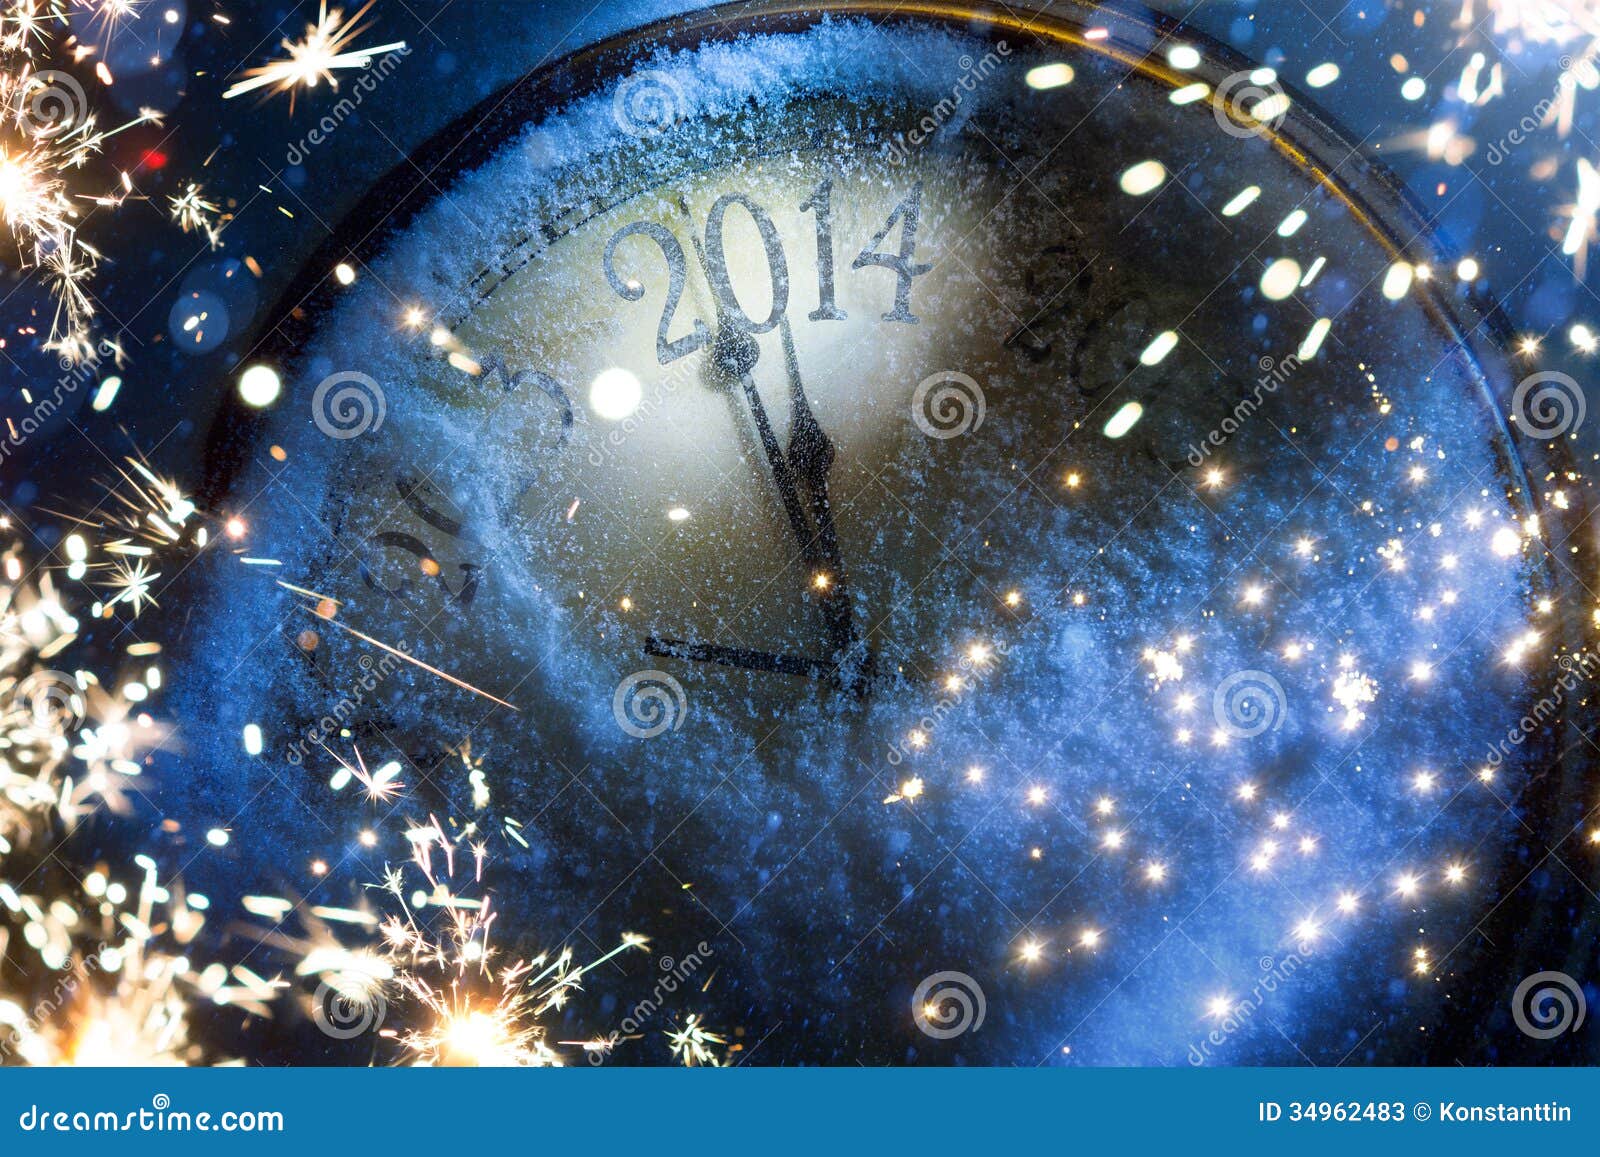 clipart new years eve 2014 - photo #35